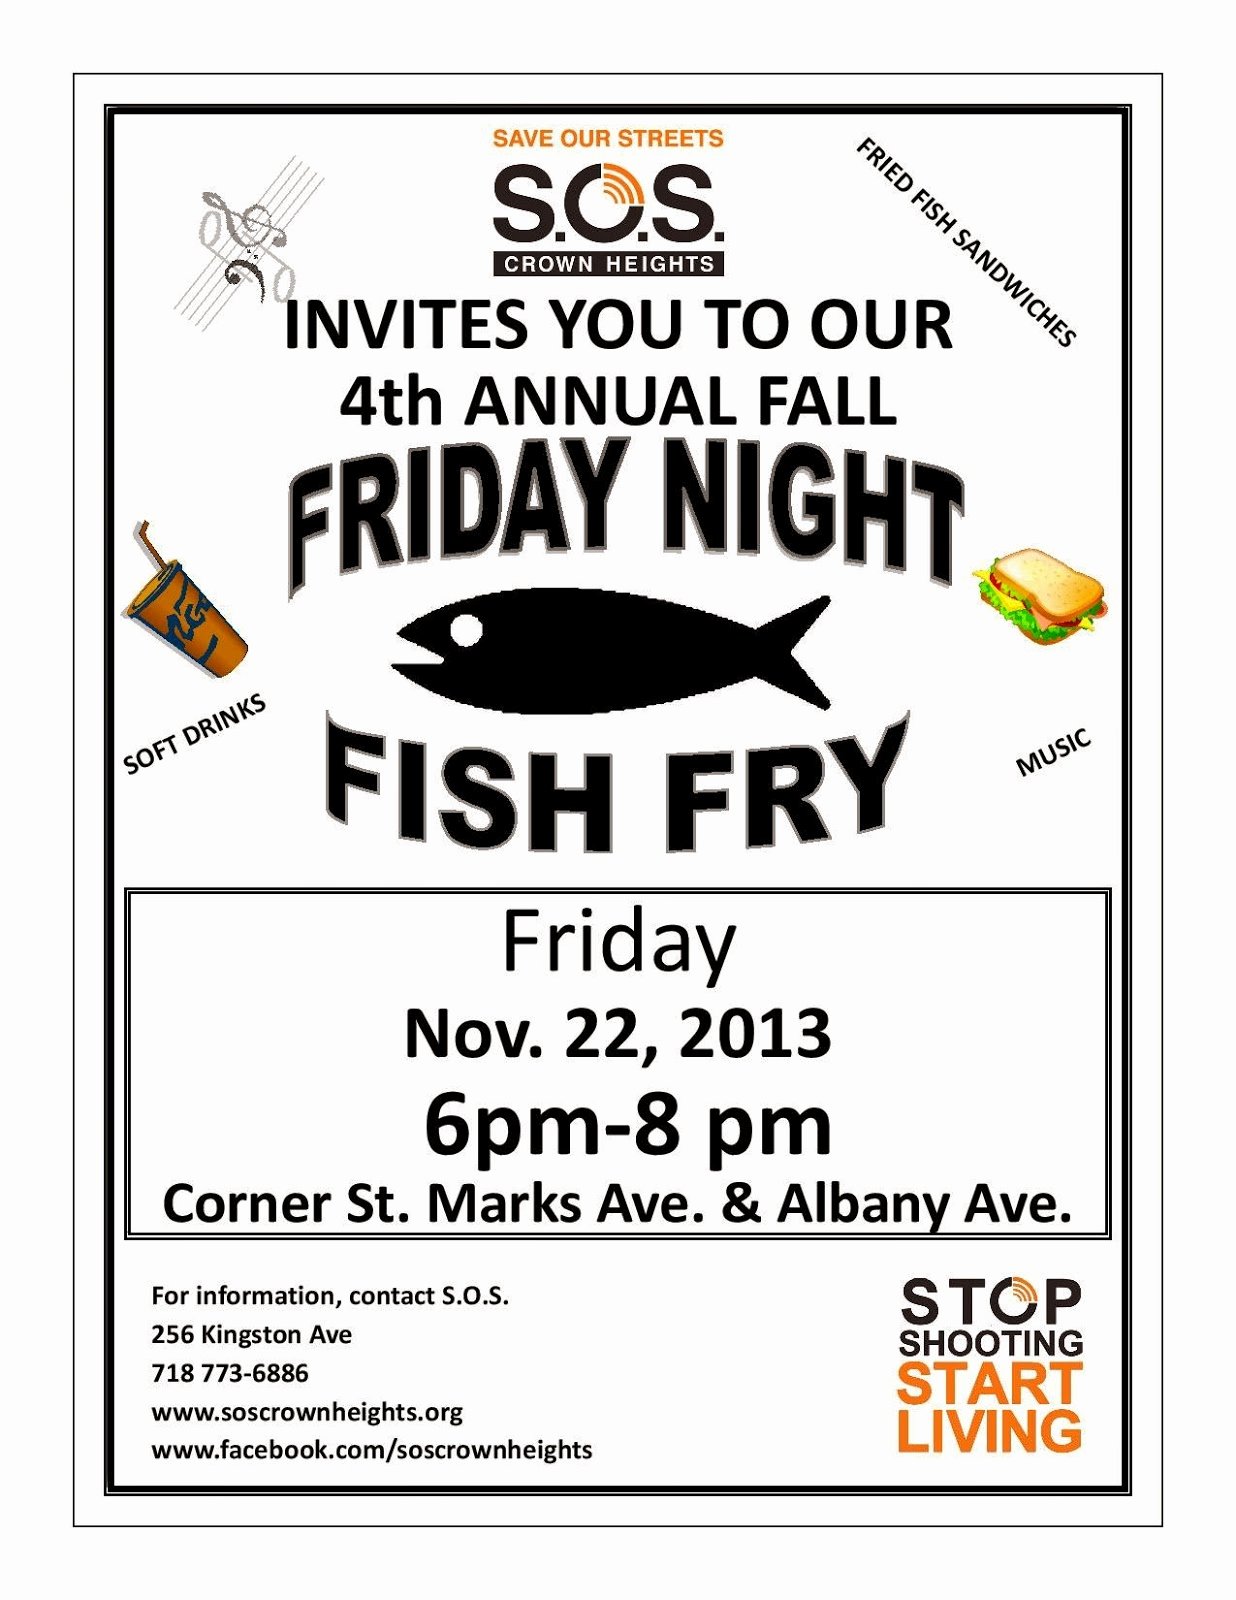 Fish Fry Flyer Template Beautiful S O S Crown Heights and S O S Bed Stuy Join Us for the Fall Fish Fry